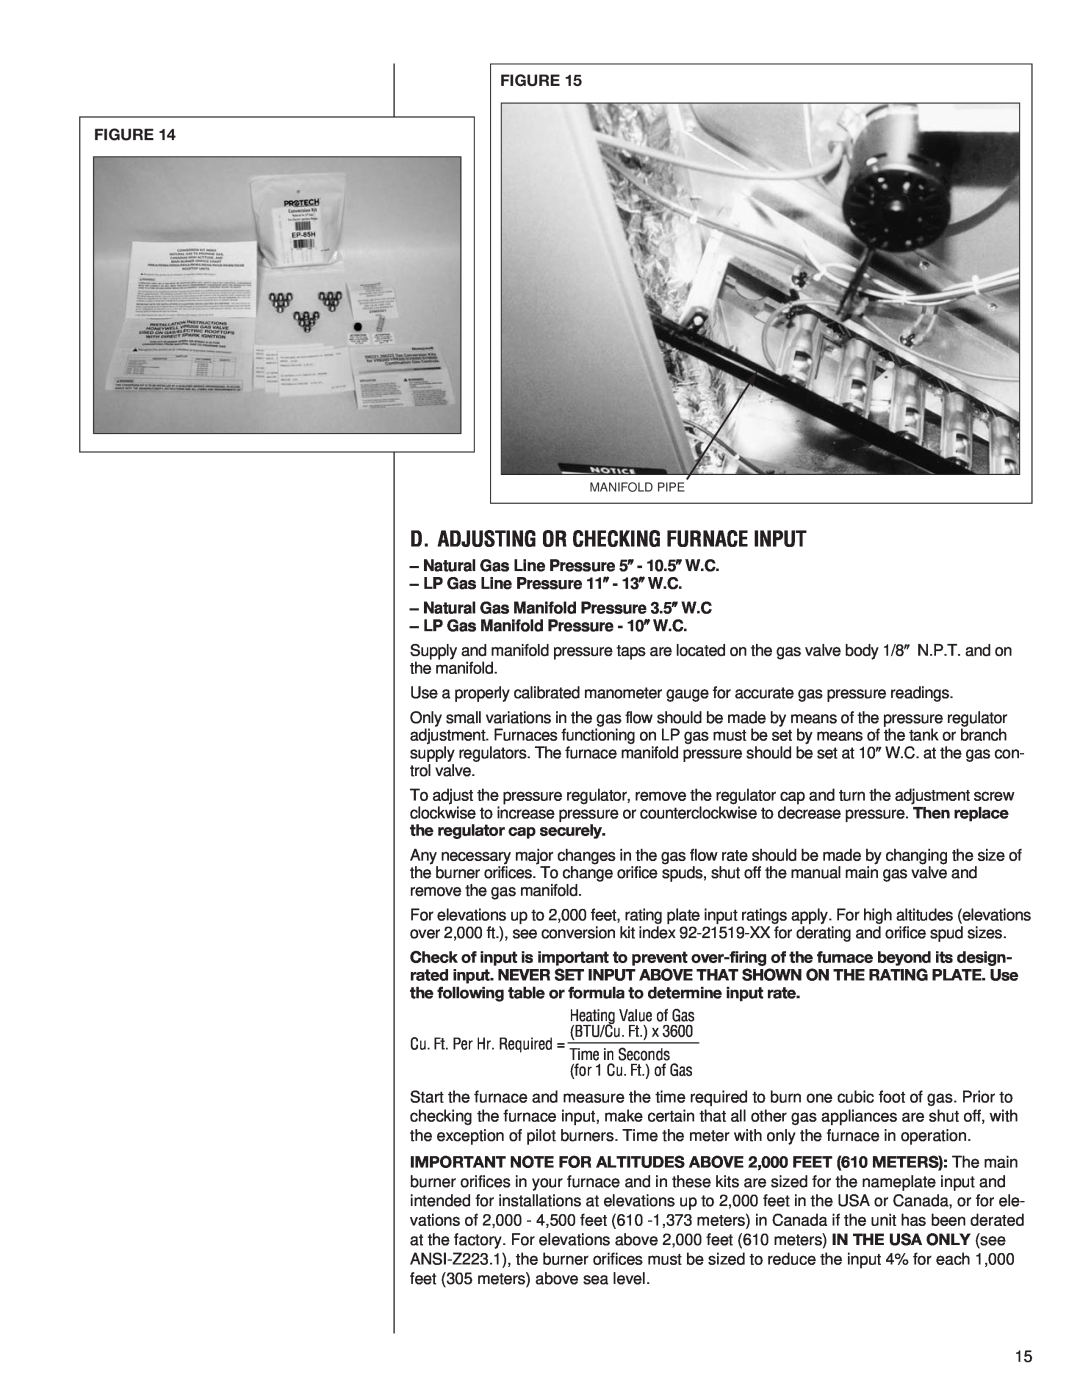 Heat Controller A-13 installation instructions D. Adjusting Or Checking Furnace Input 